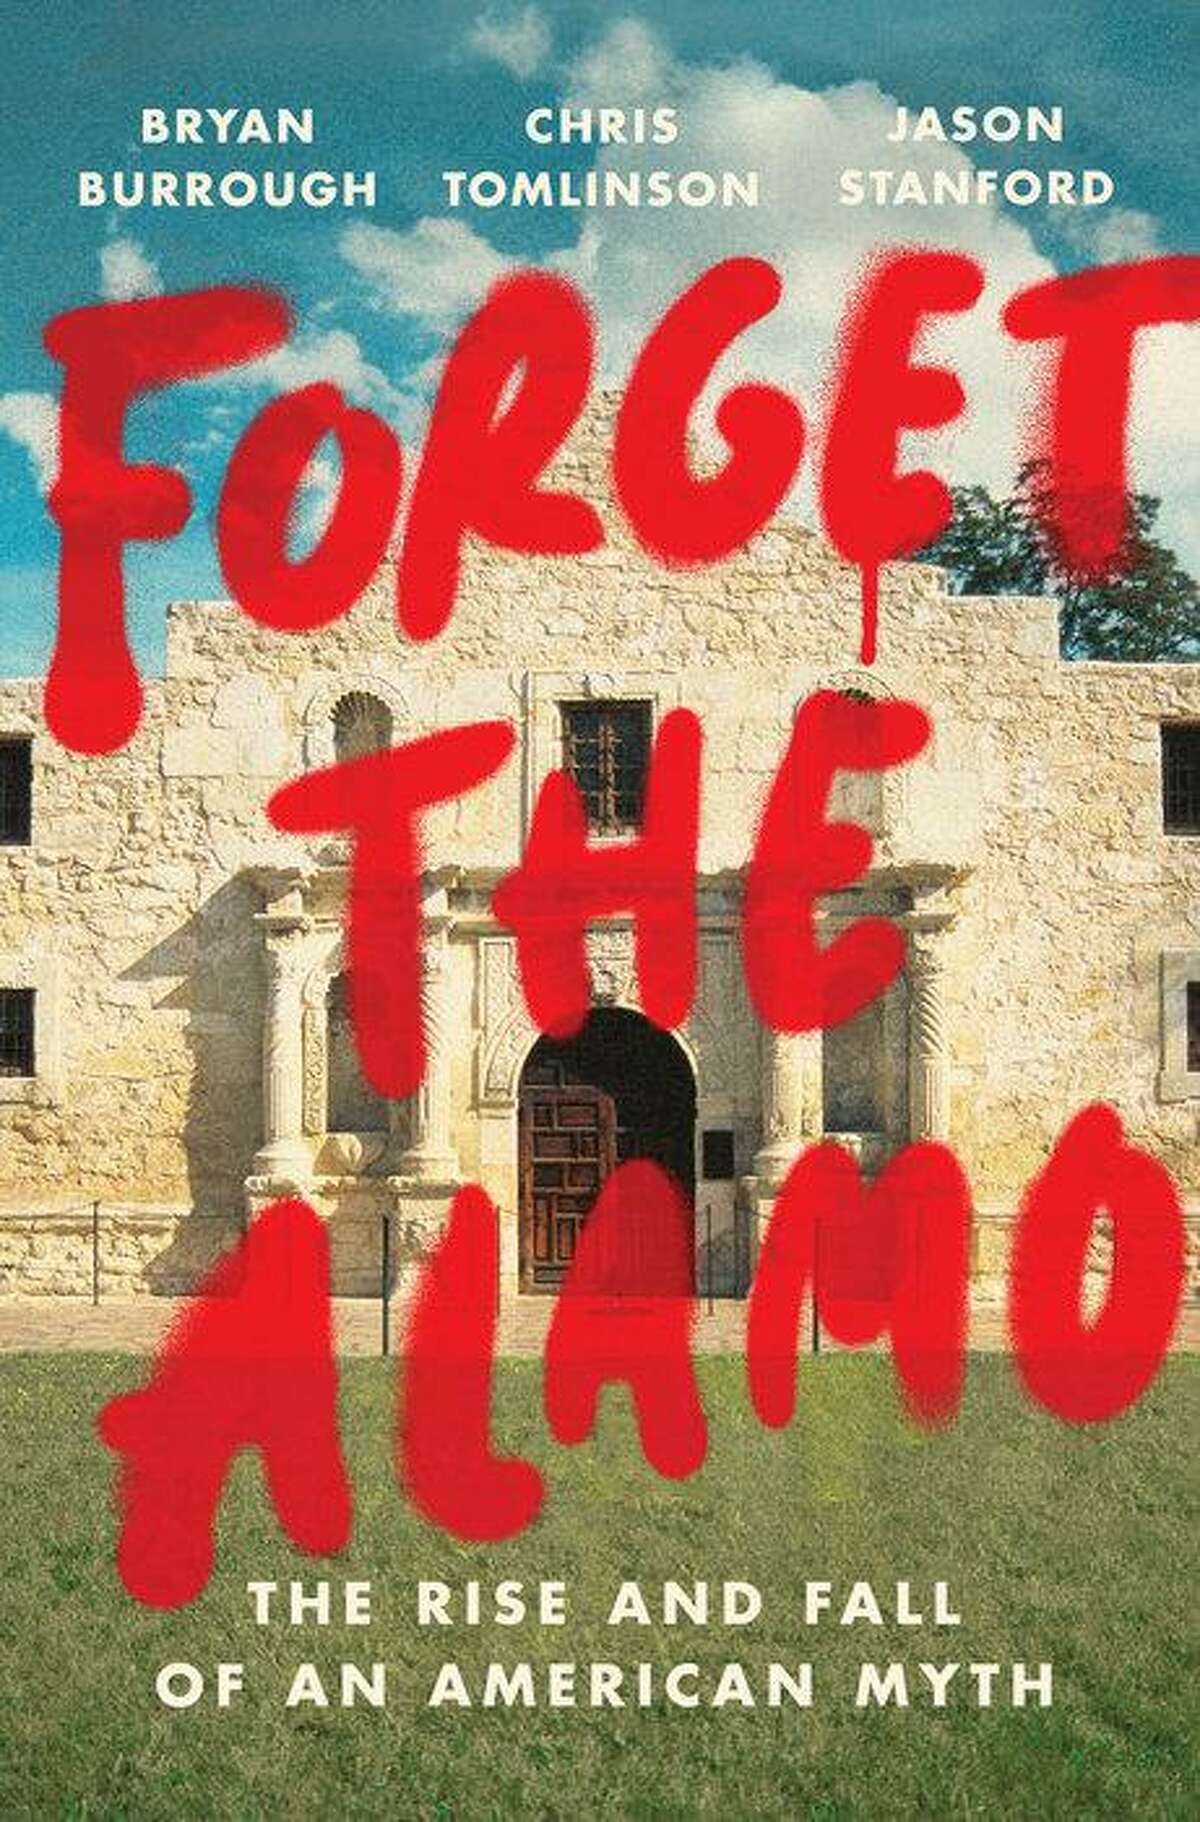 “Forget the Alamo: The Rise and Fall of an American Myth,” written by Bryan Burrough, Chris Tomlinson and Jason Stanford, was published in June 2021.